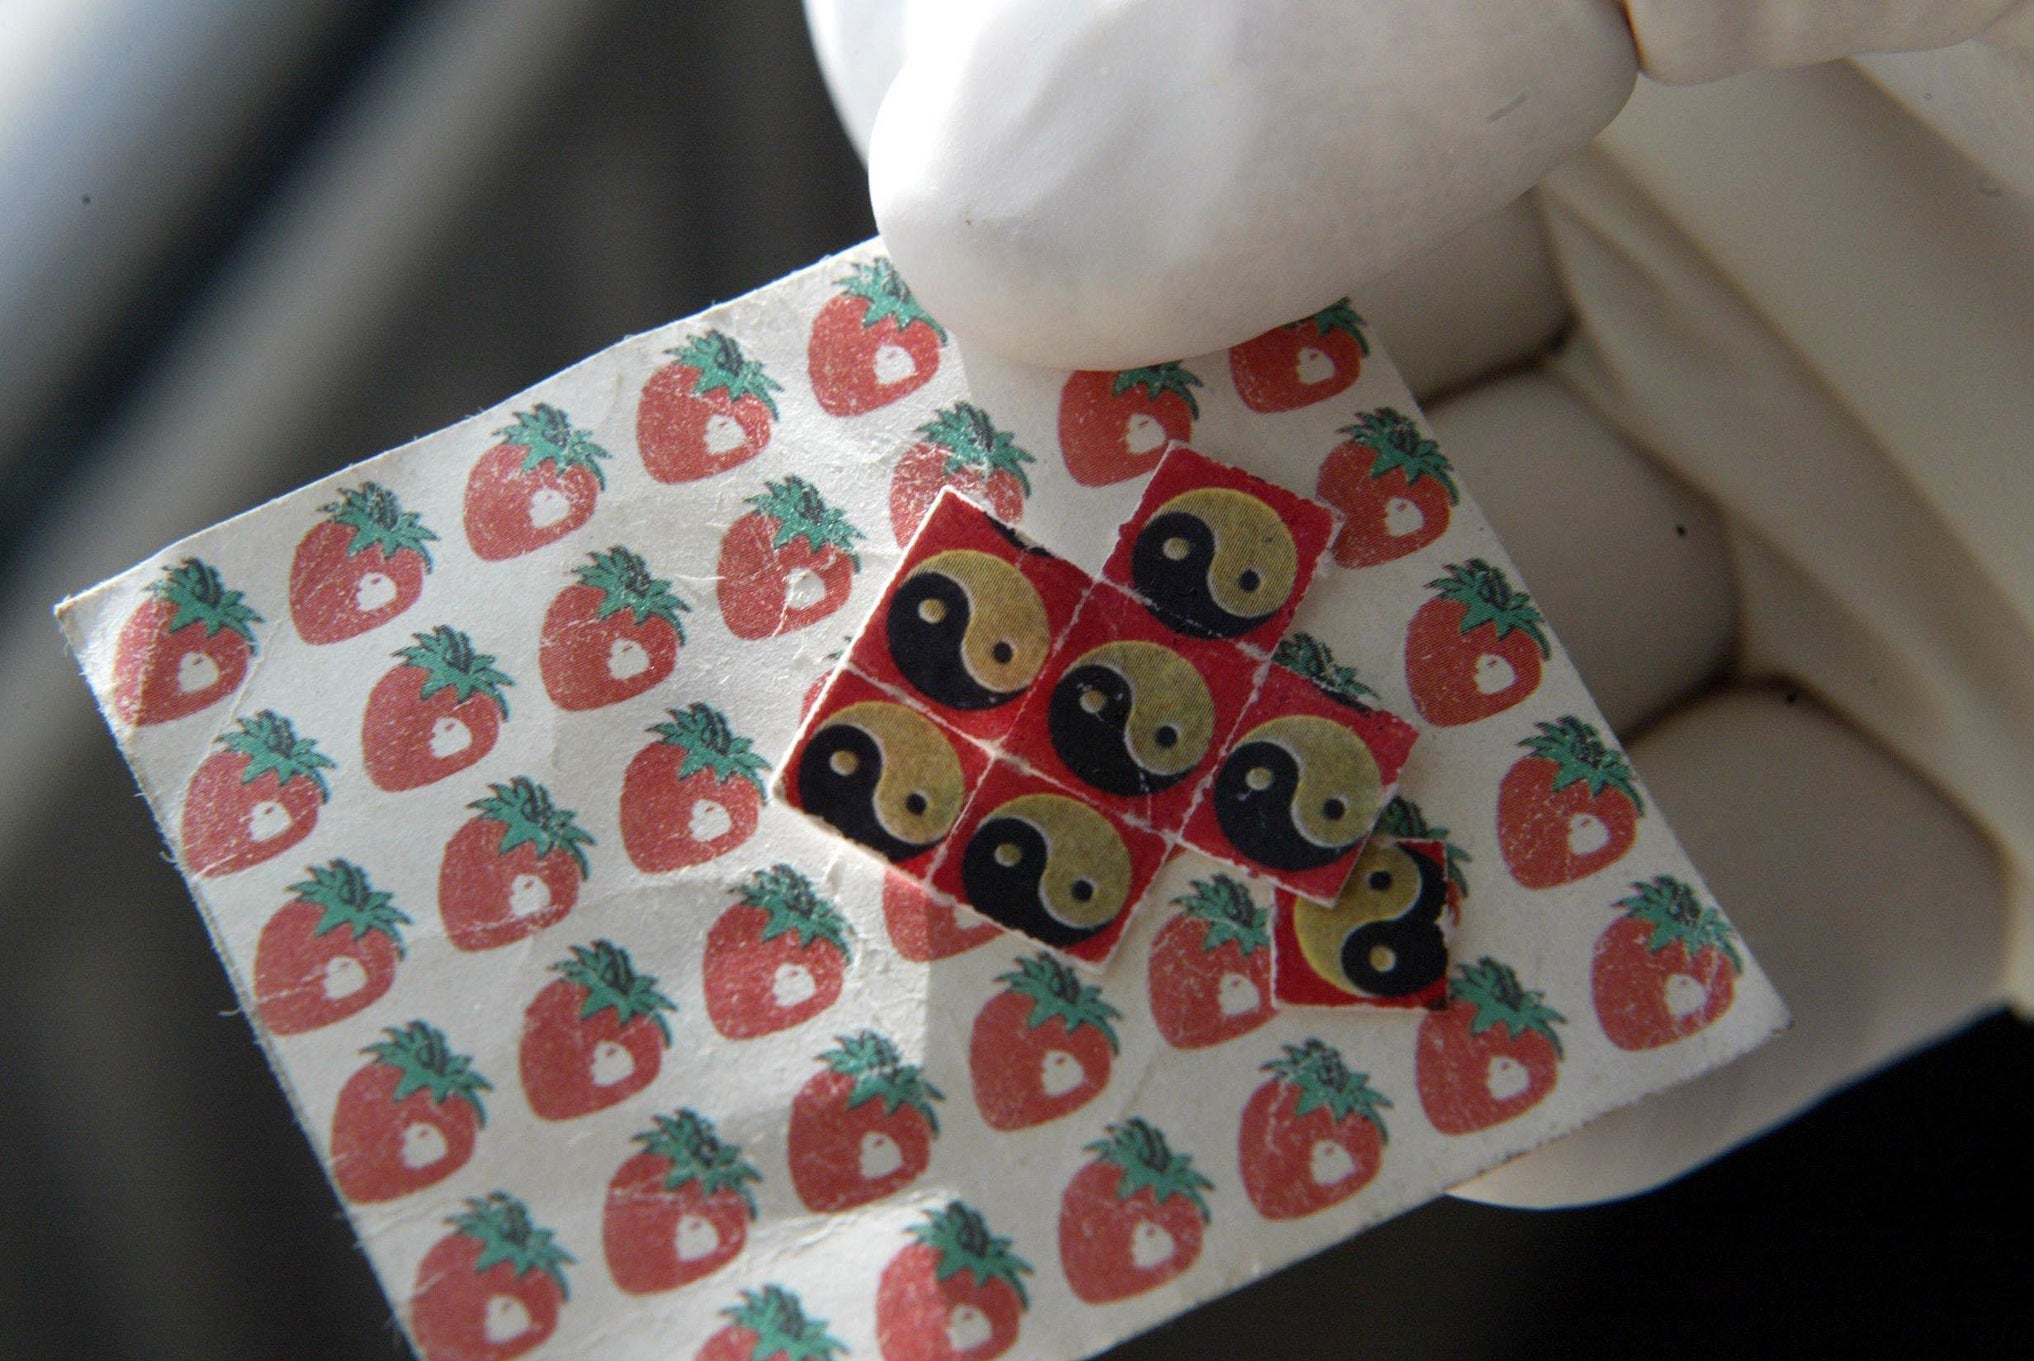 A sheet of LSD tabs – there have been mixed results in trials so far (P